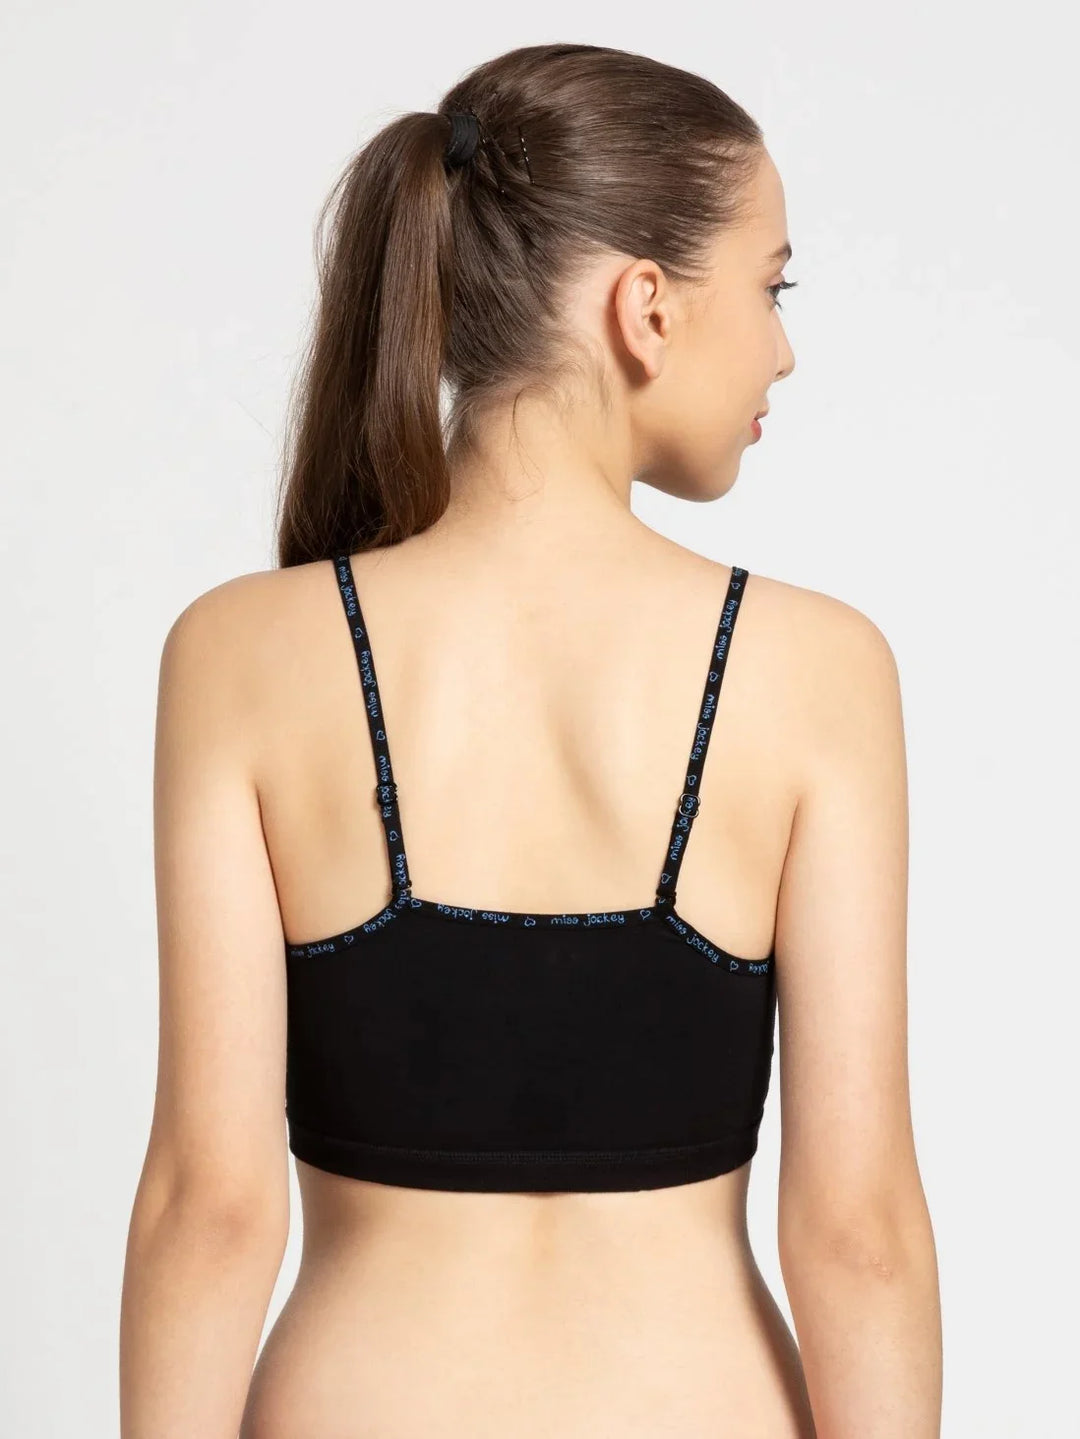 Buy Women's Super Combed Cotton Elastane Stretch Multiway Styled Crop Top  With Adjustable Straps and Stay Fresh Treatment - Light Skin 1351